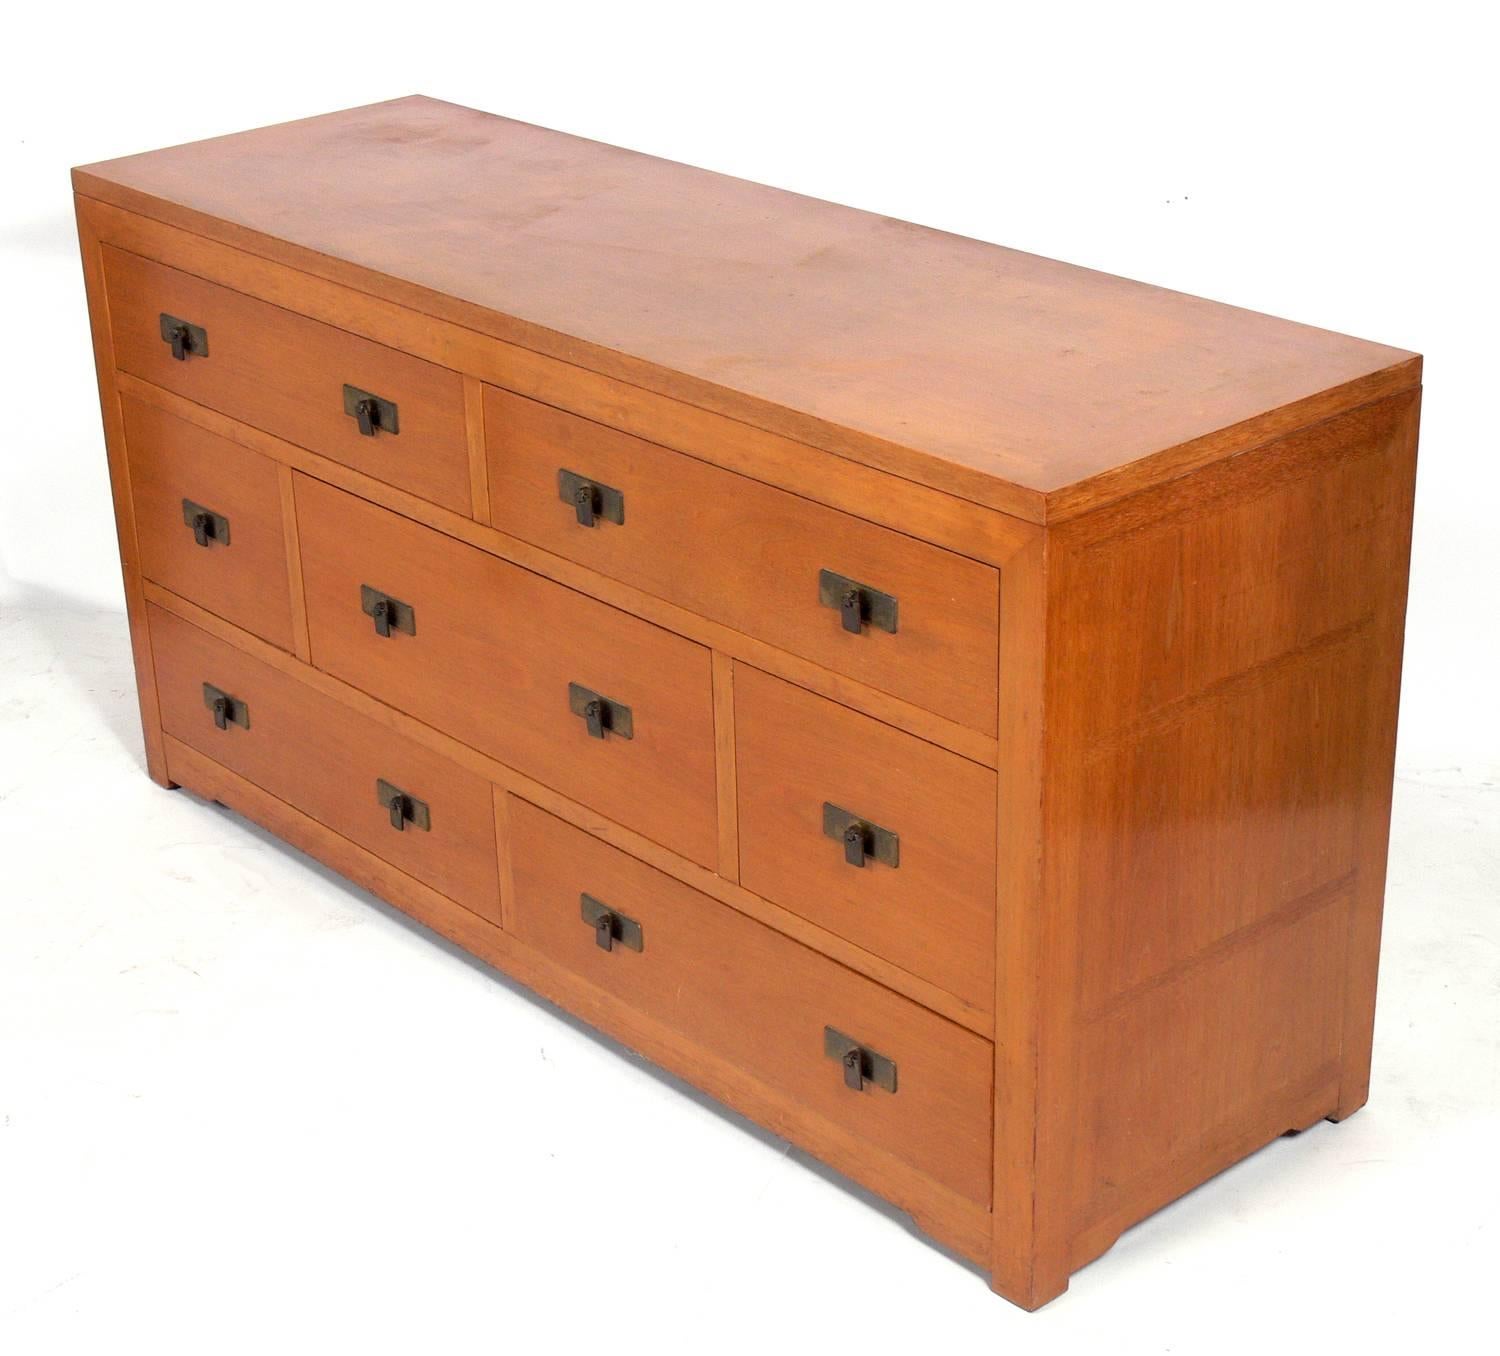 Clean lined Asian inspired chest or dresser, in the manner of Dunbar, American, circa 1950s. This chest is currently being refinished and can be completed in your choice of color. The price noted below includes refinishing in your choice of color.